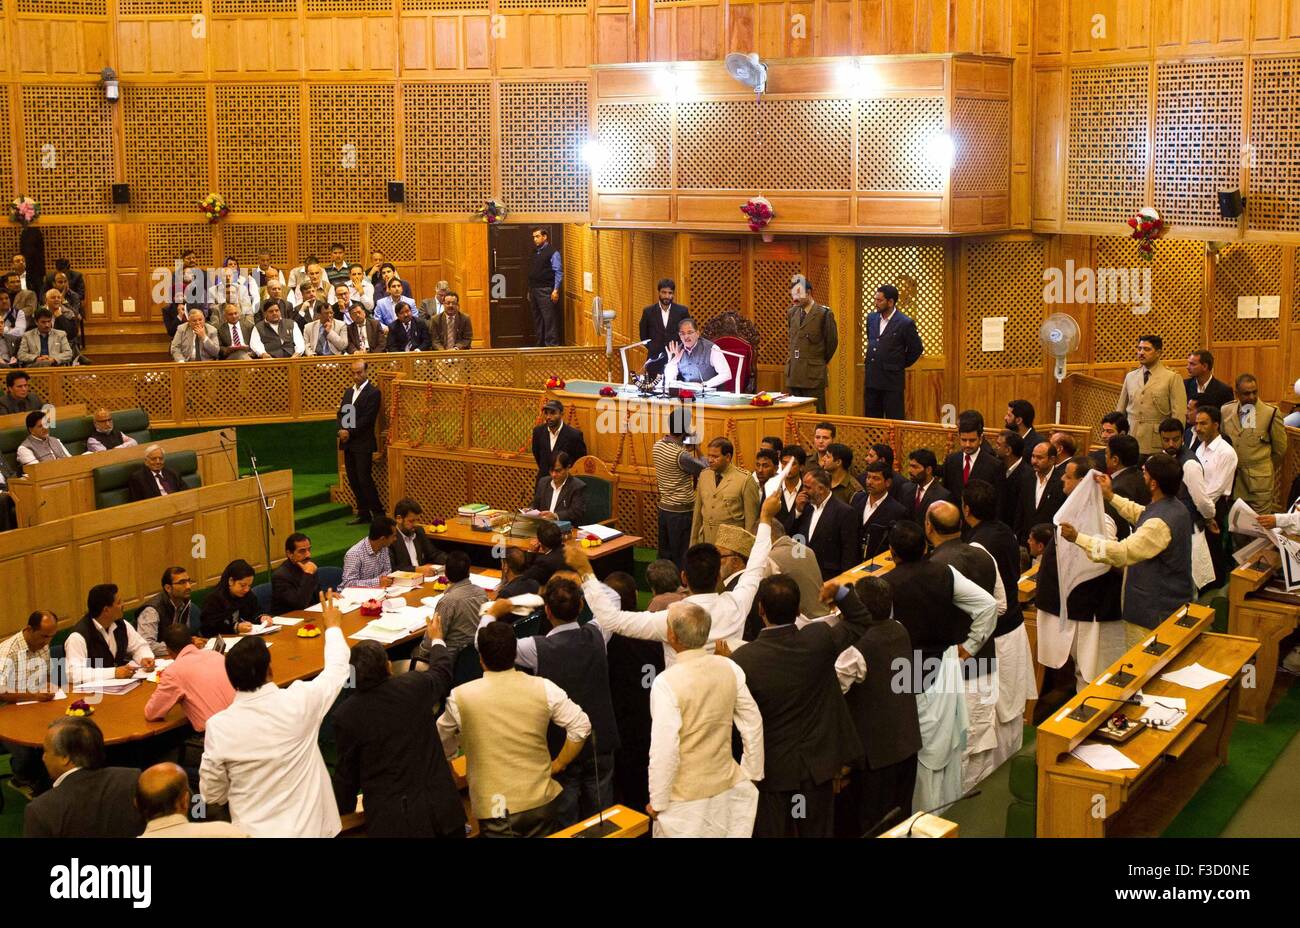 Srinagar, Indian-controlled Kashmir. 5th Oct, 2015. Lawmakers shout slogans at Legislative Assembly in Srinagar, summer capital of Indian-controlled Kashmir, Oct. 5, 2015. The Lawmakers protested against Indian Prime Minister Narendra Modi and Chief Minister of Indian-controlled Kashmir Mufti Muhammad Sayeed on banning slaughter of bovine animals and sale of beef in the region and the failure of the government to provide relief to the 2014 flood victims. Credit:  Javed Dar/Xinhua/Alamy Live News Stock Photo